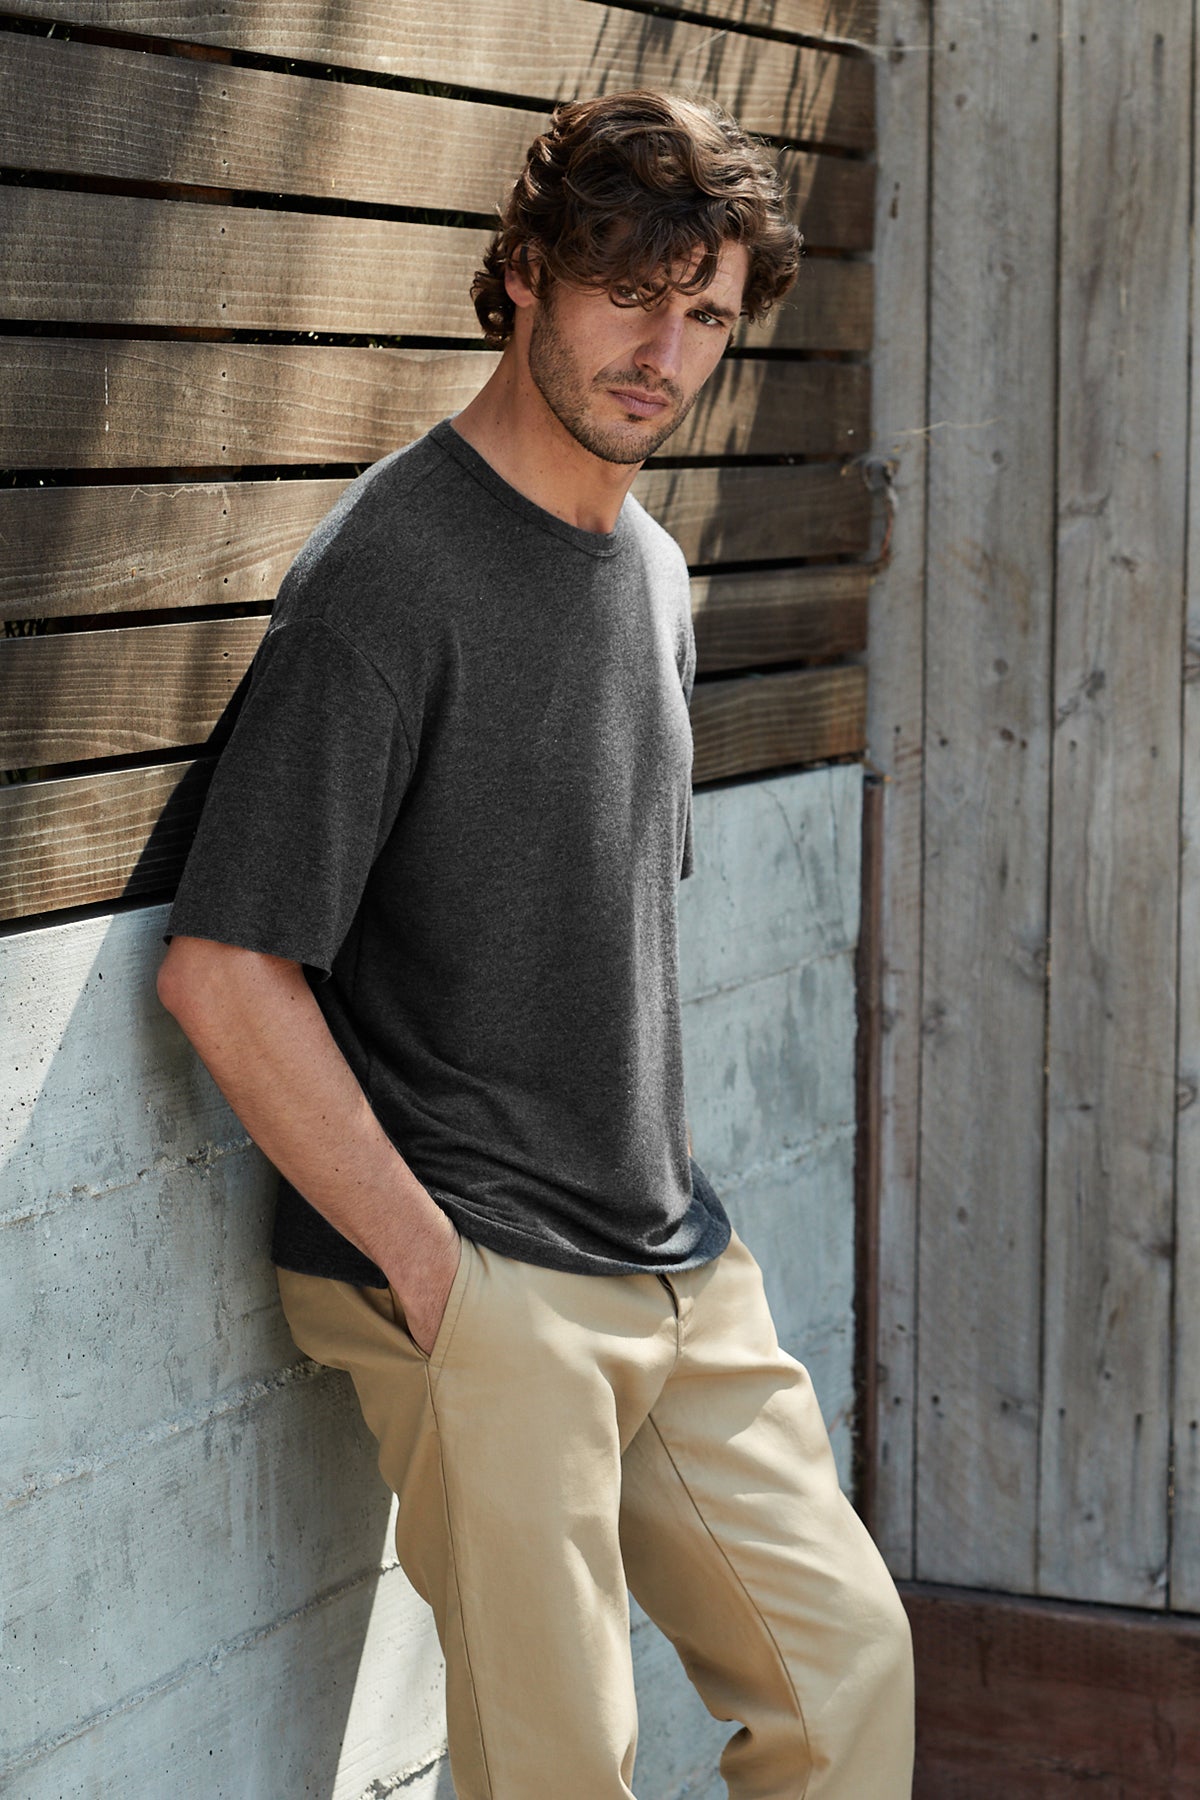   Model leaning against a wall outside with hands in pockets wearing Newall crew neck shirt in dark heathered grey anthracite color. 